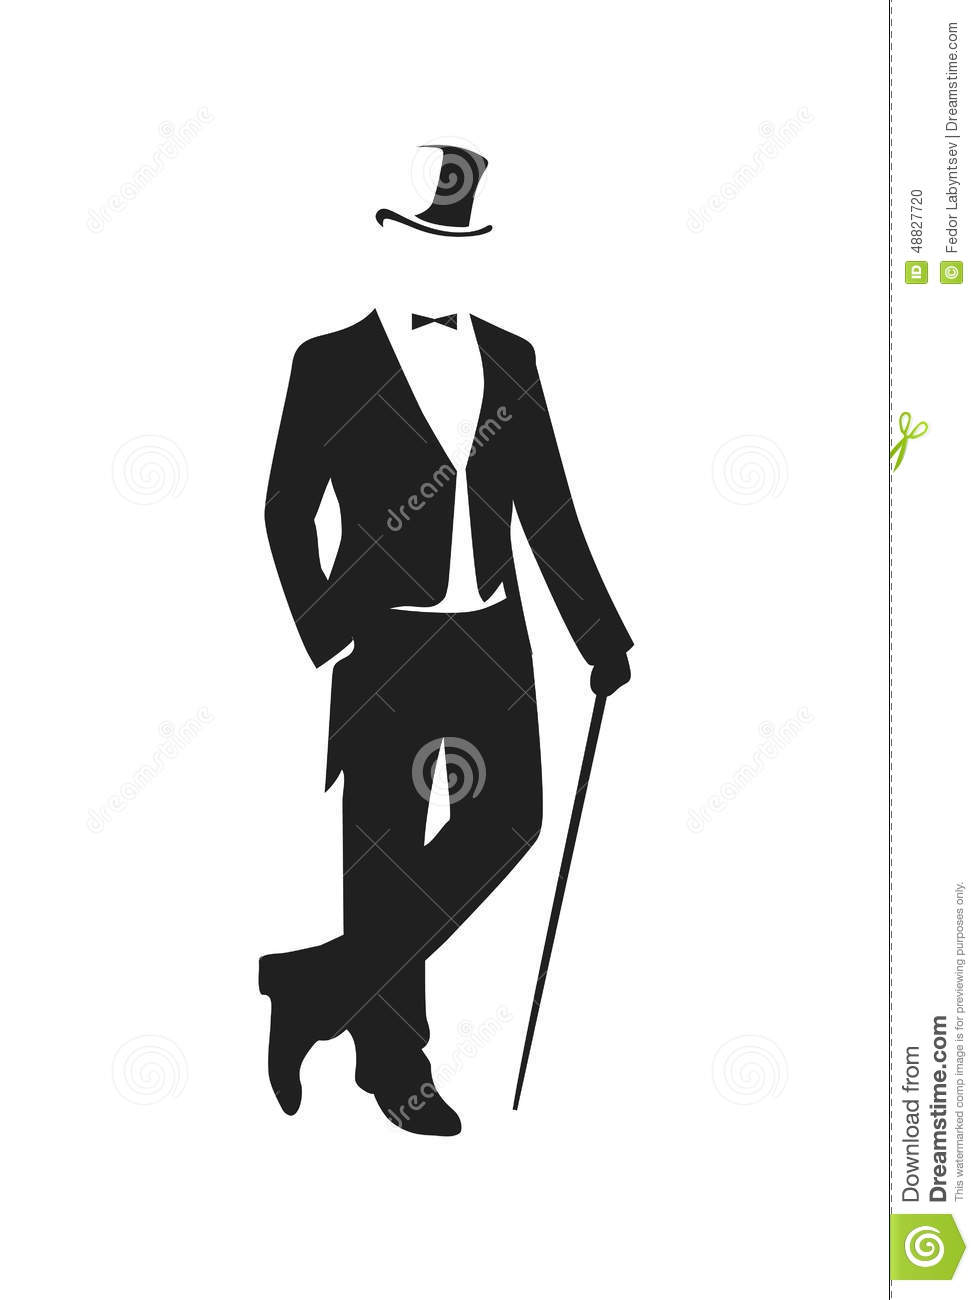 Silhouette Of A Gentleman In A Tuxedo Stock Vector   Image  48827720